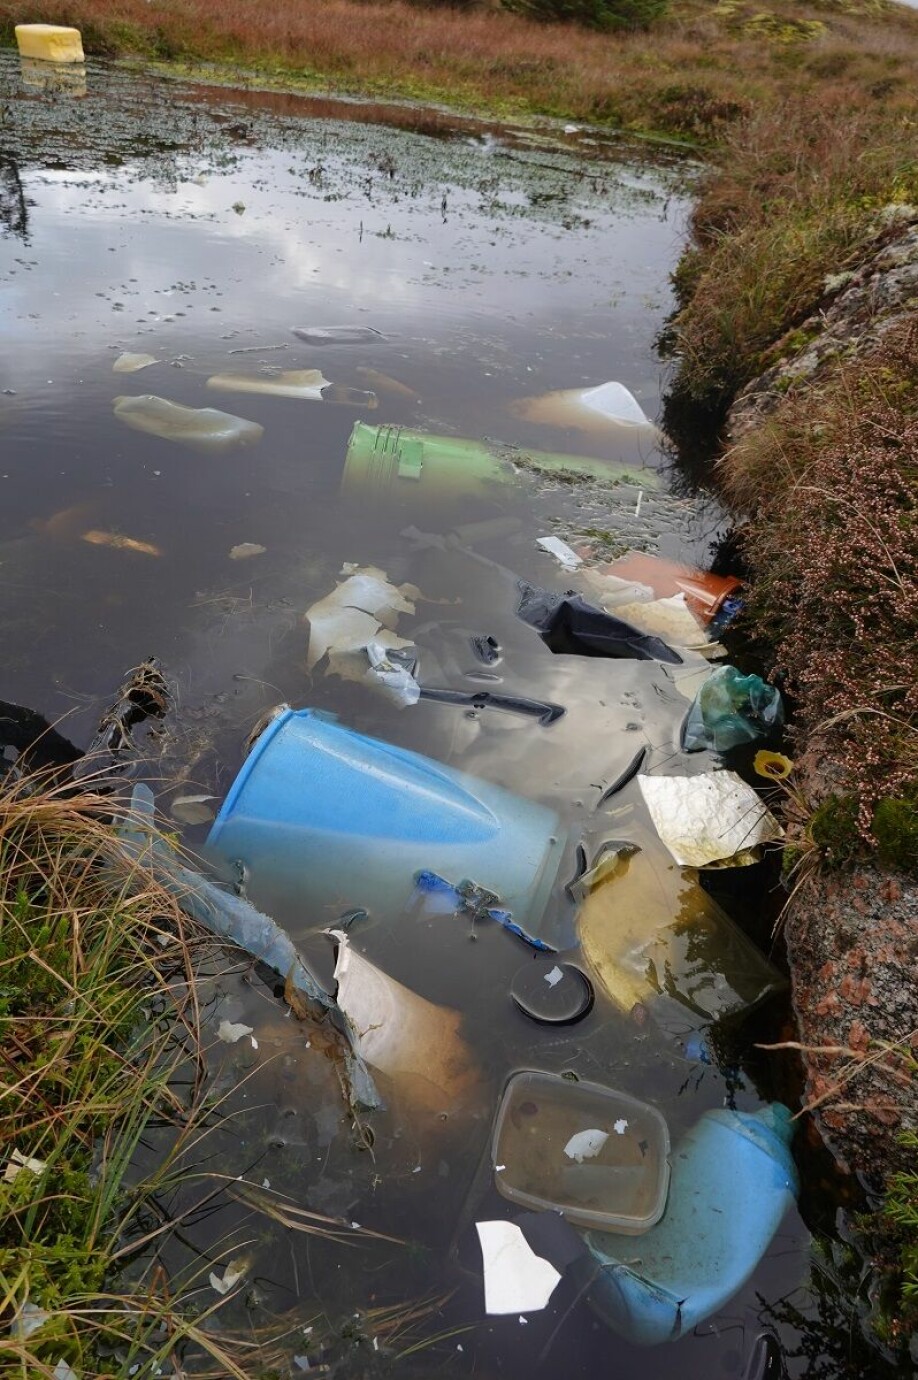 Many freshwater sources for birds and animals on the islands are contaminated with plastic.